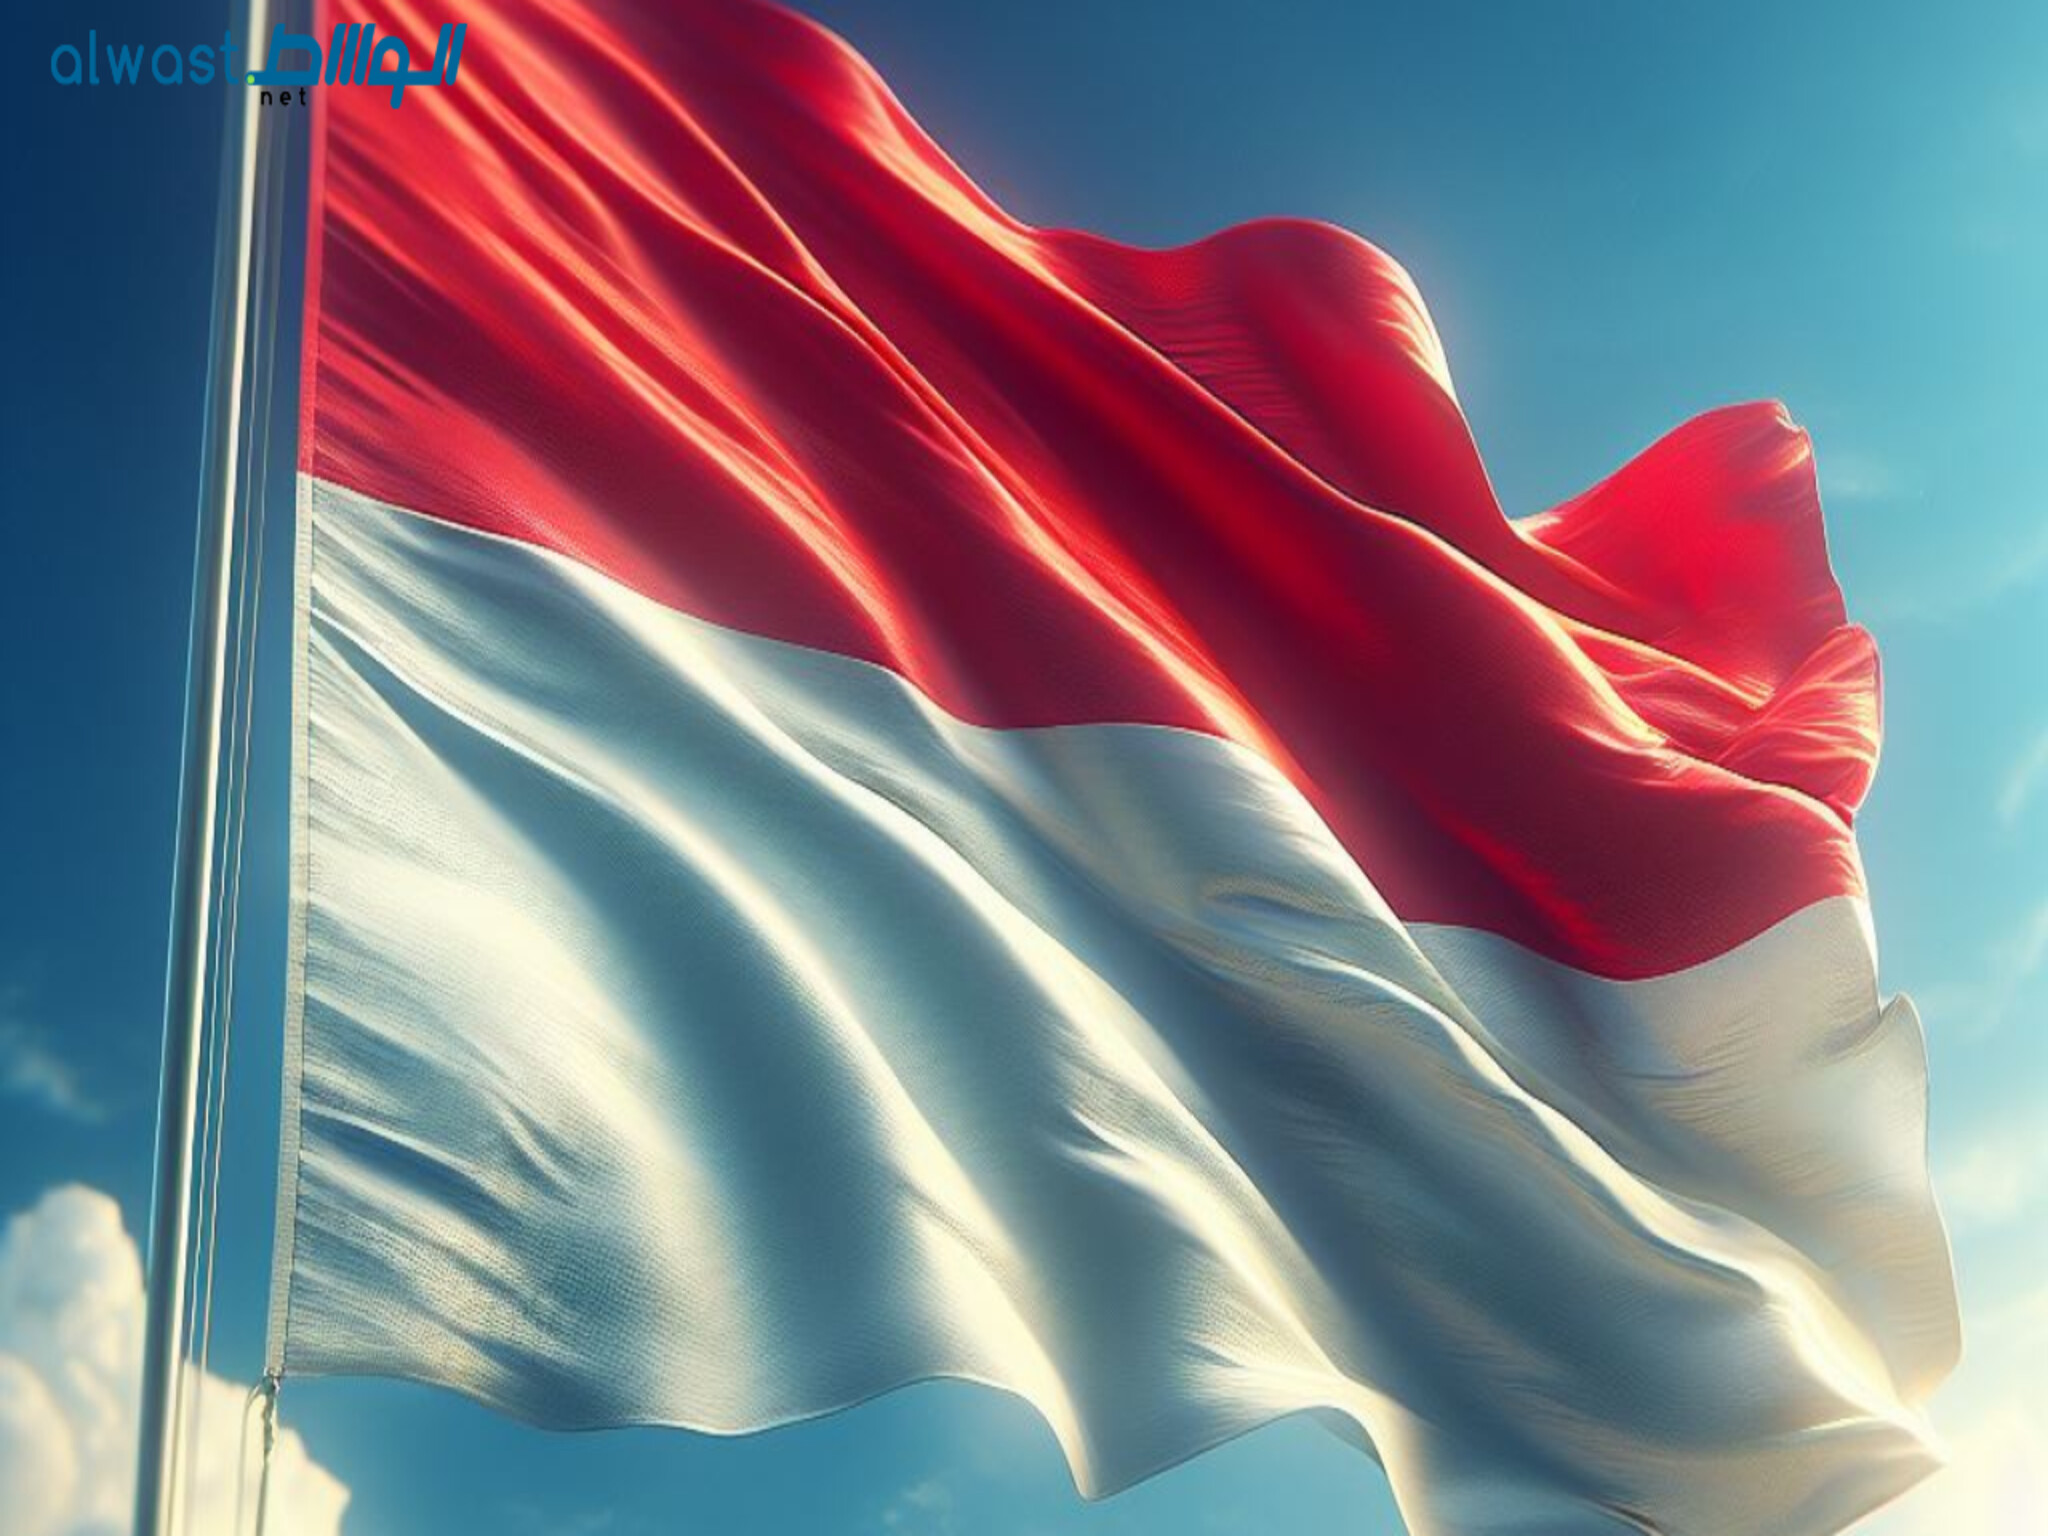 Indonesia Offers Dual Citizenship to Attract Overseas Workers